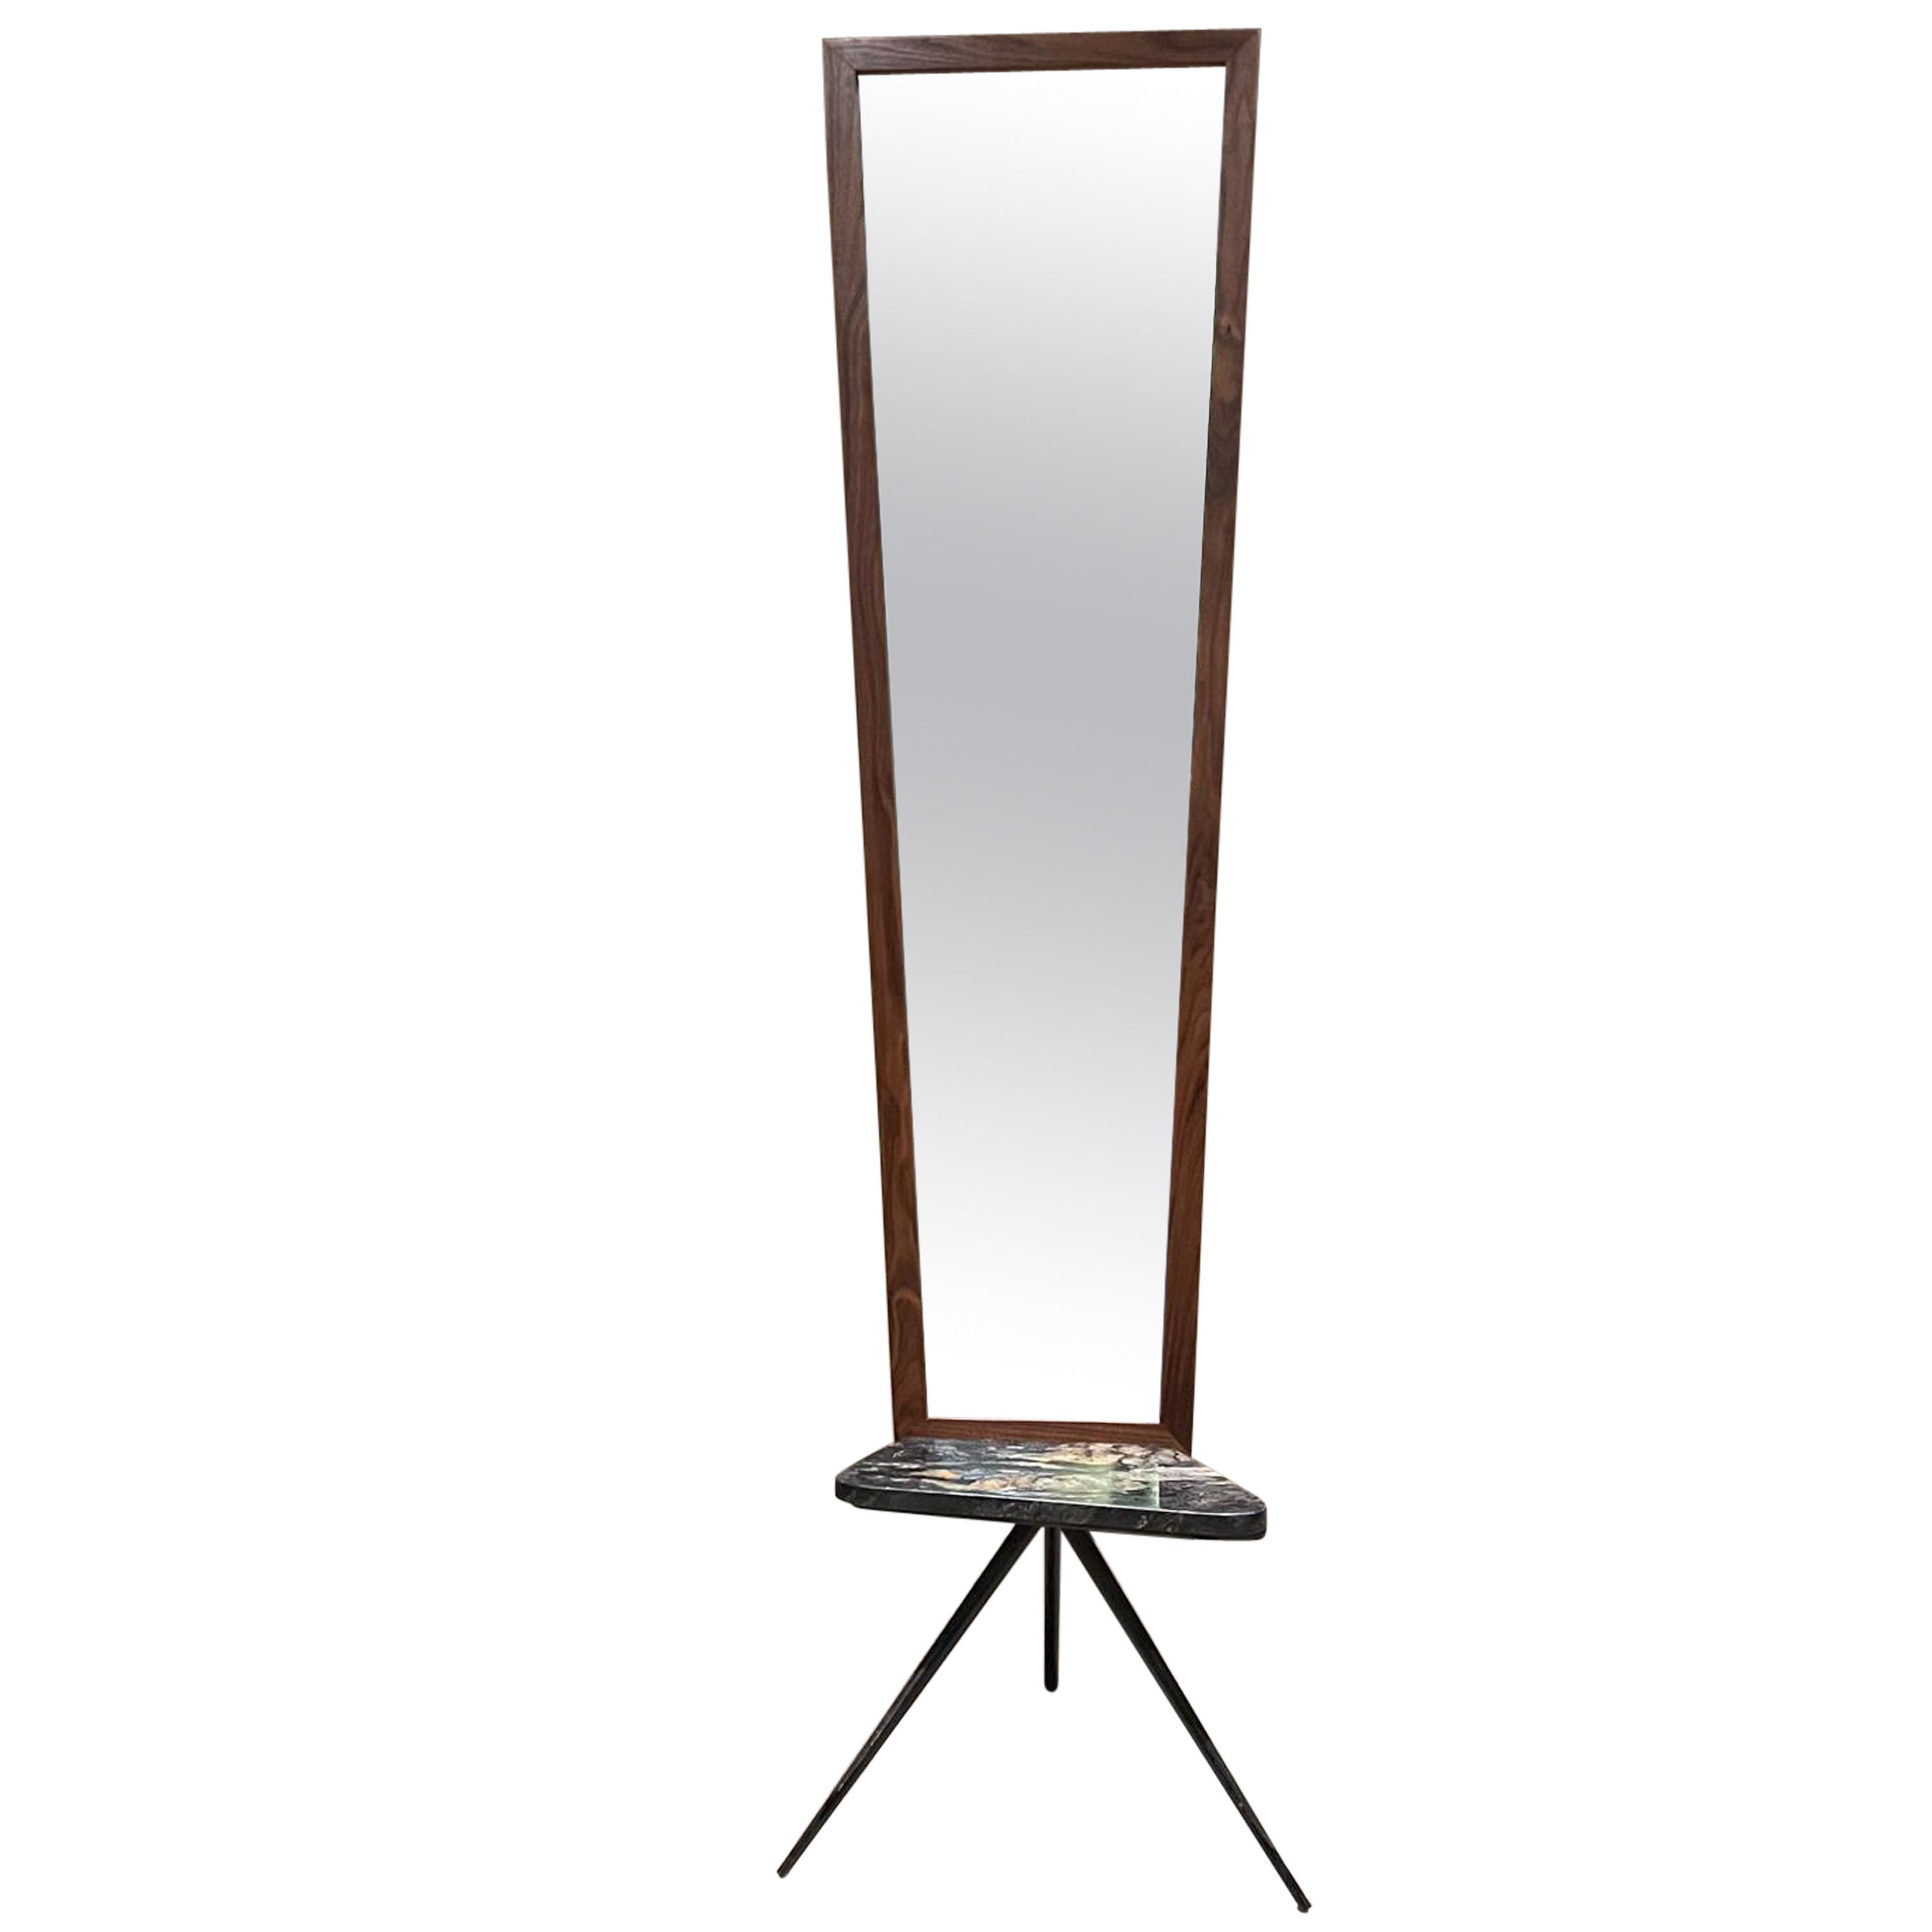 1950s Modern French Floor Mirror Marble & Metal Tripod Base from France For Sale